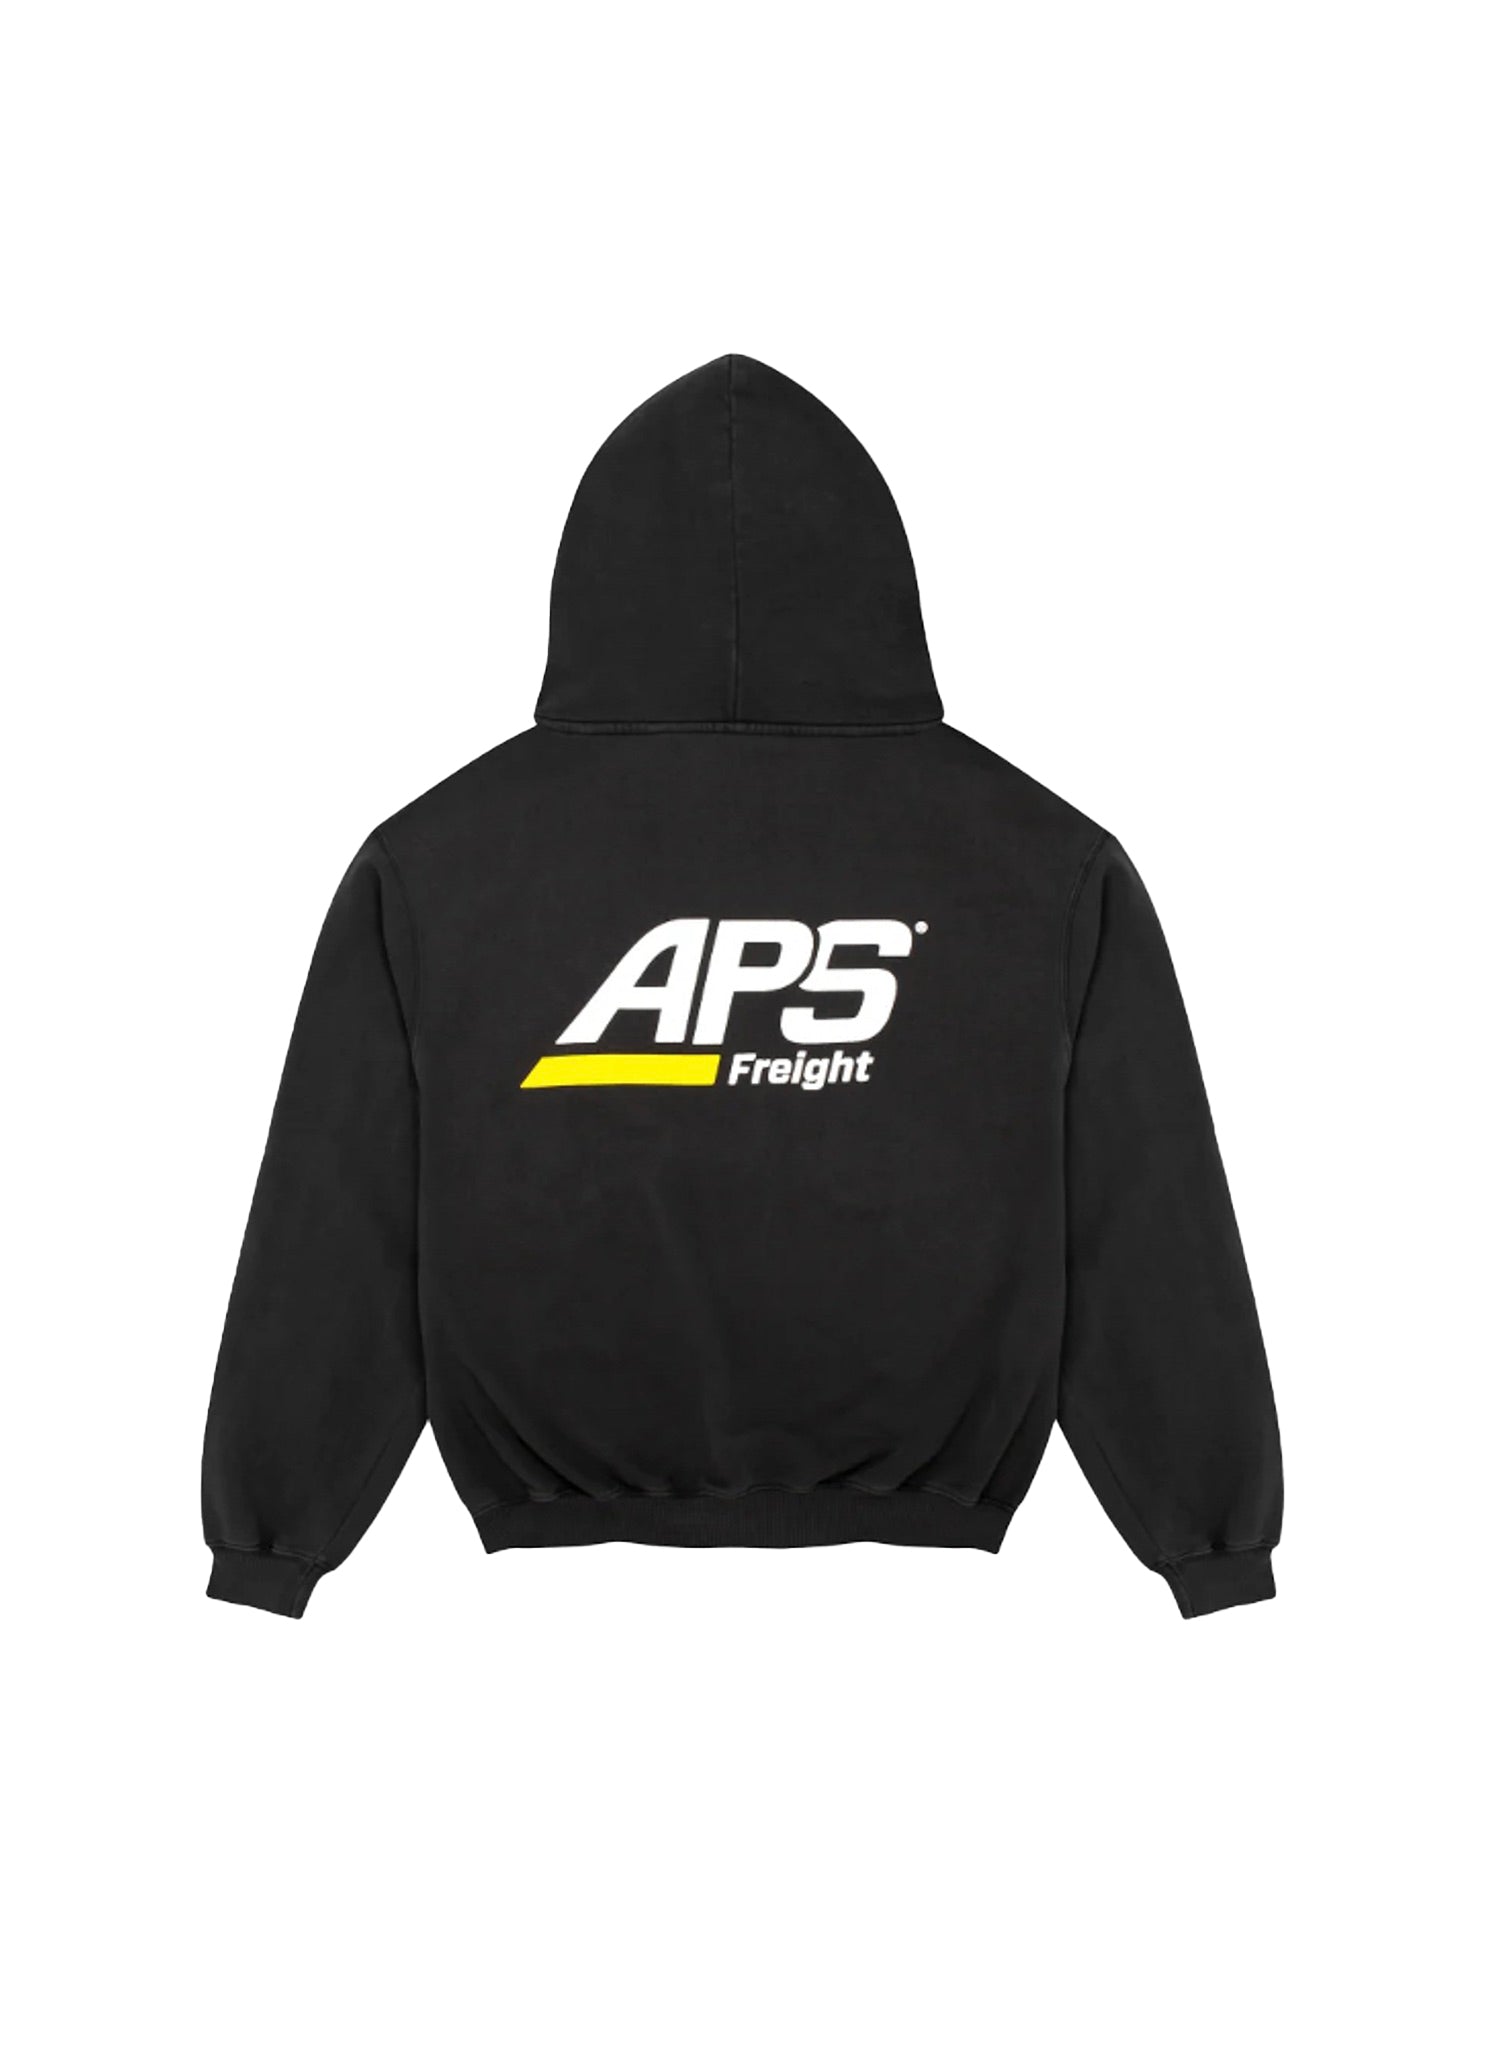 <span style="color: #f50b0b;">Last One</span> ARNOLD PARK STUDIOS / OIL AND FREIGHT LOGO HOODIE FADED BLACK